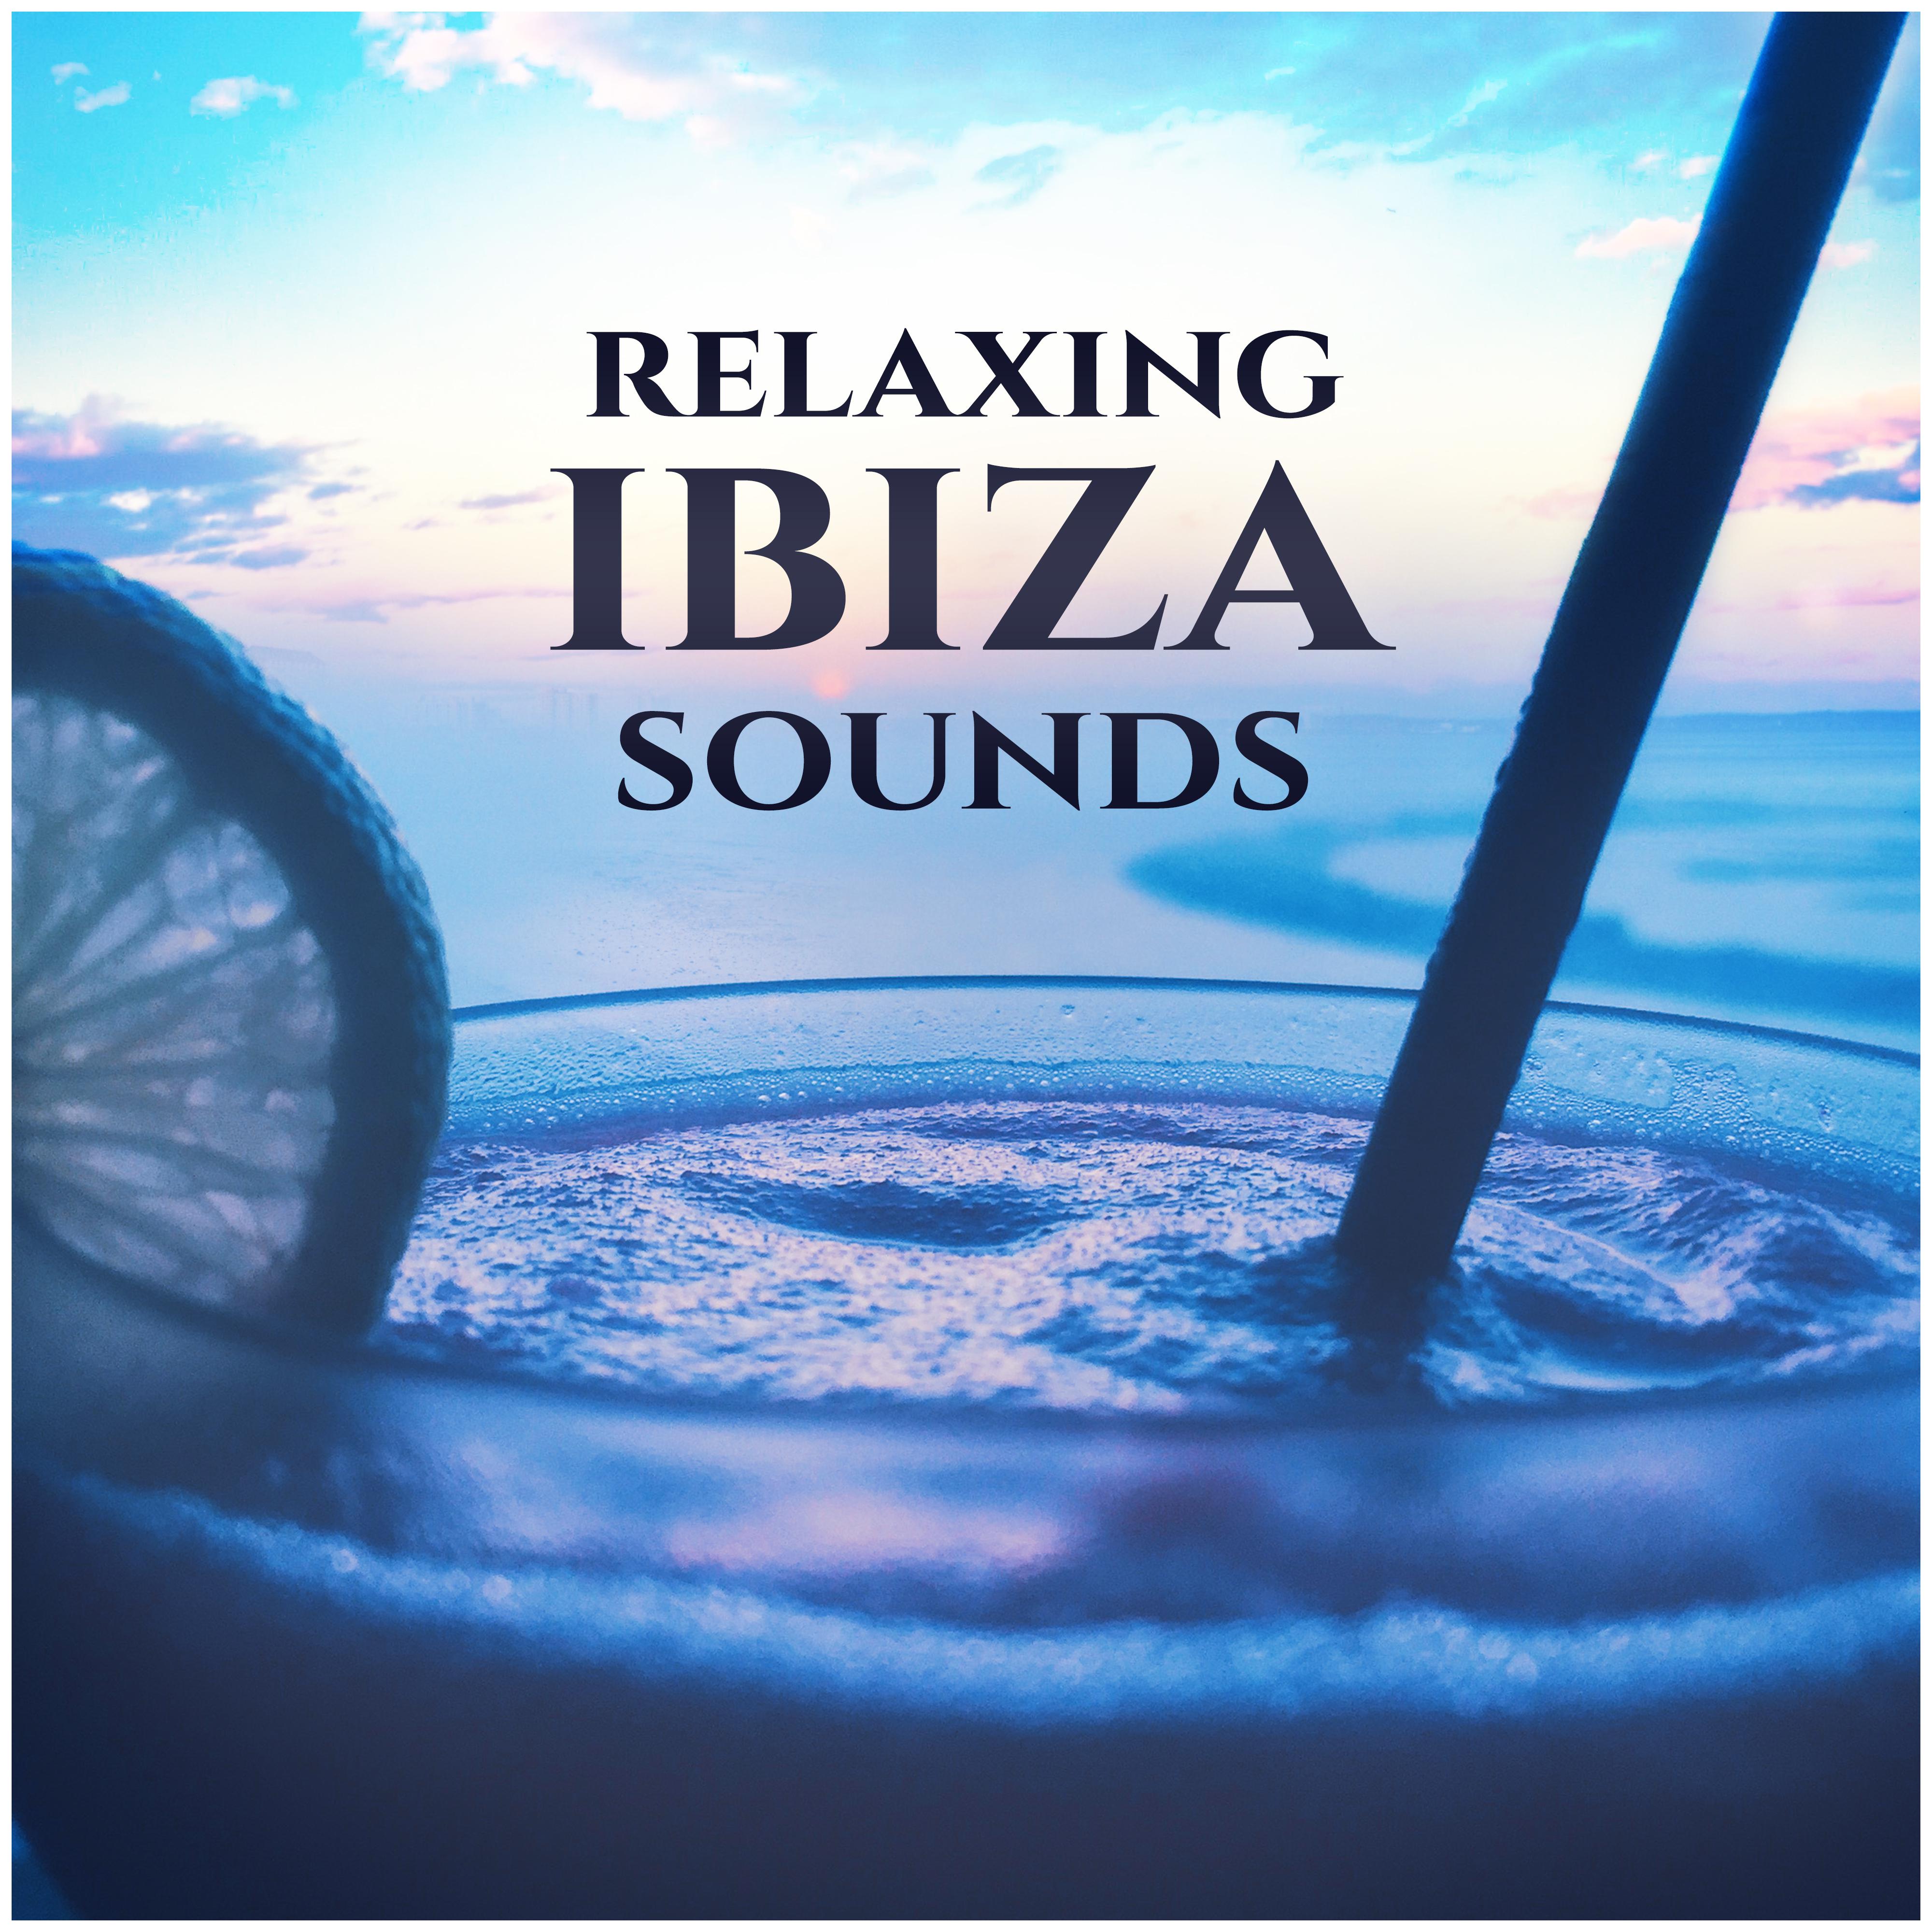 Relaxing Ibiza Sounds  Chilled Melodies, Summer Songs to Relax, Rest a Bit, Soft Chill Out Beats